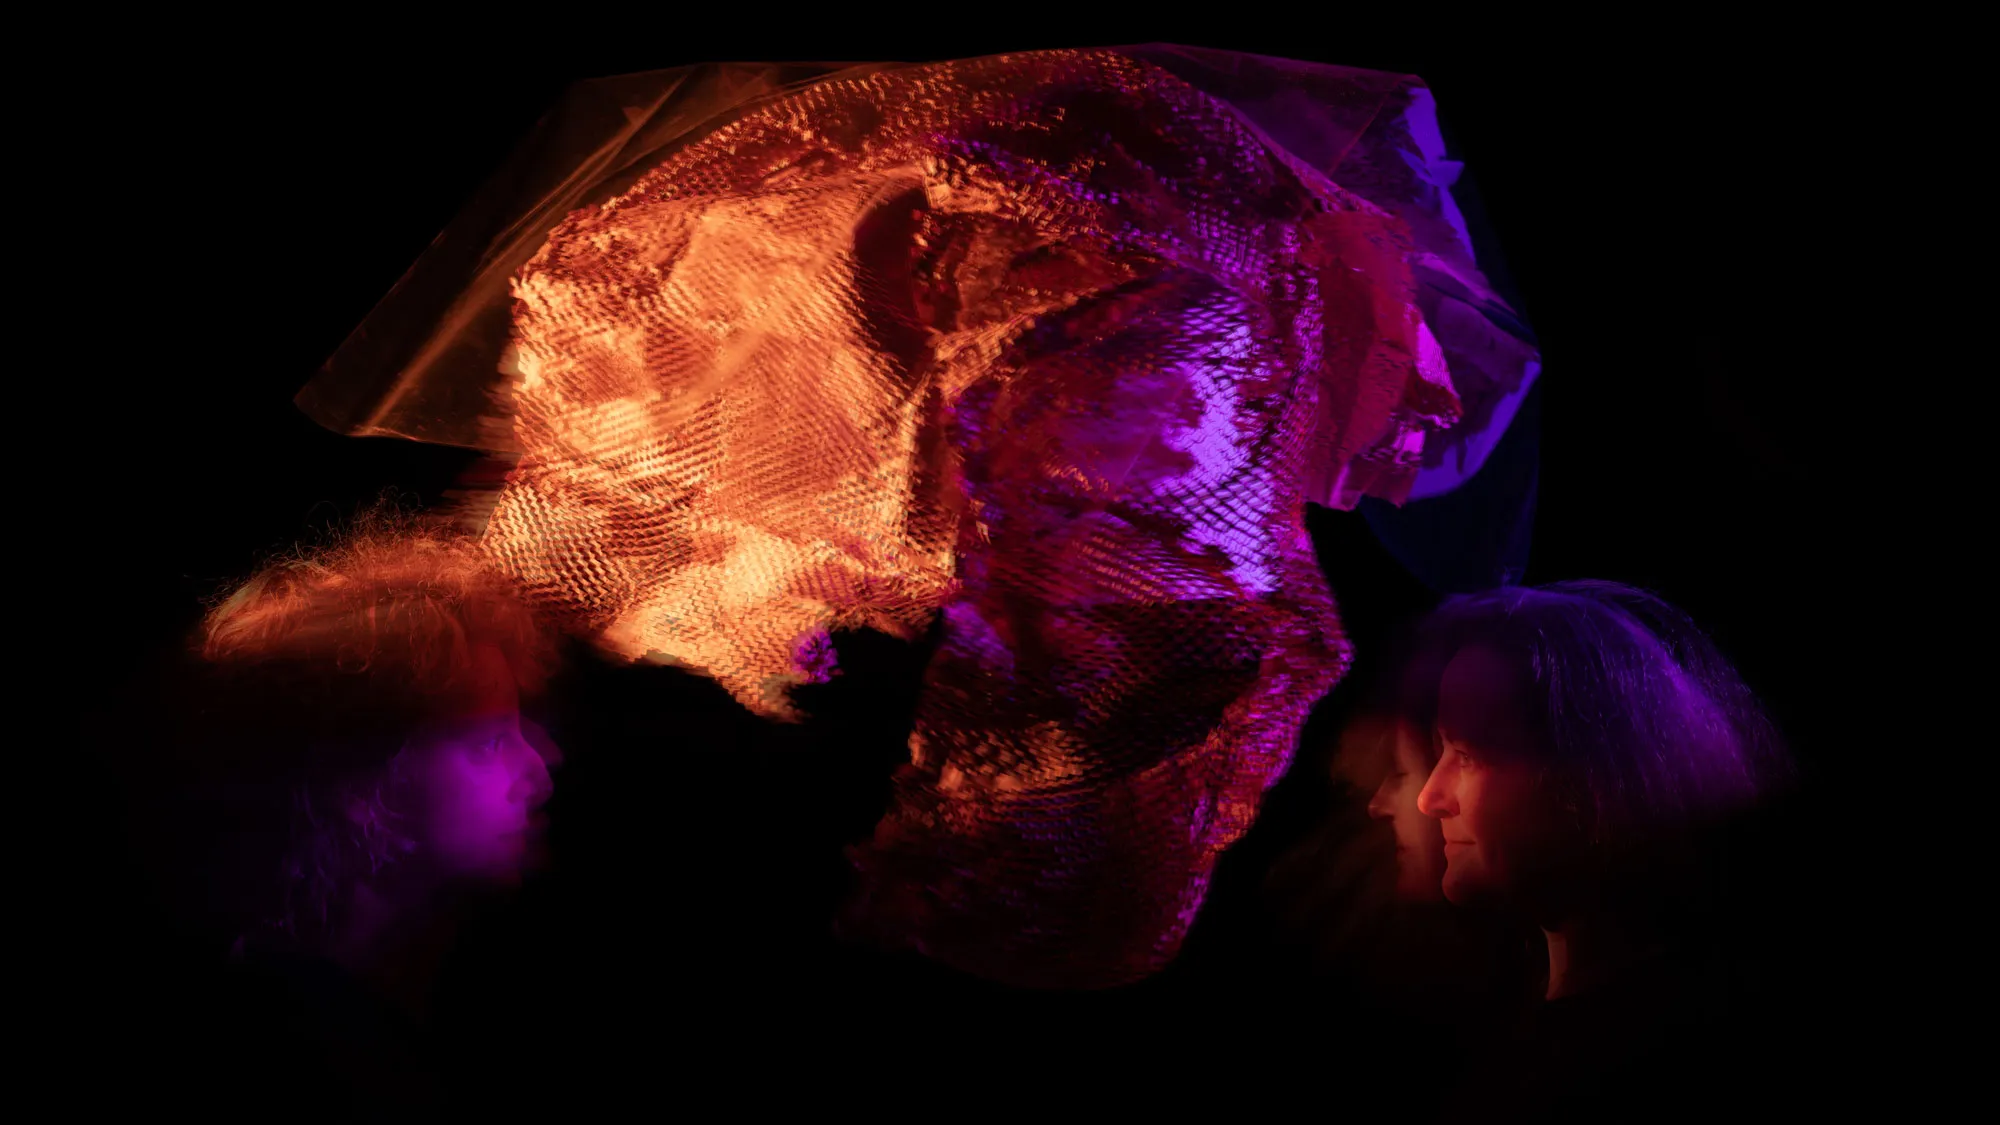 an abstract swirl of orange and purple light against a black background with the profile of a woman in the bottom right corner